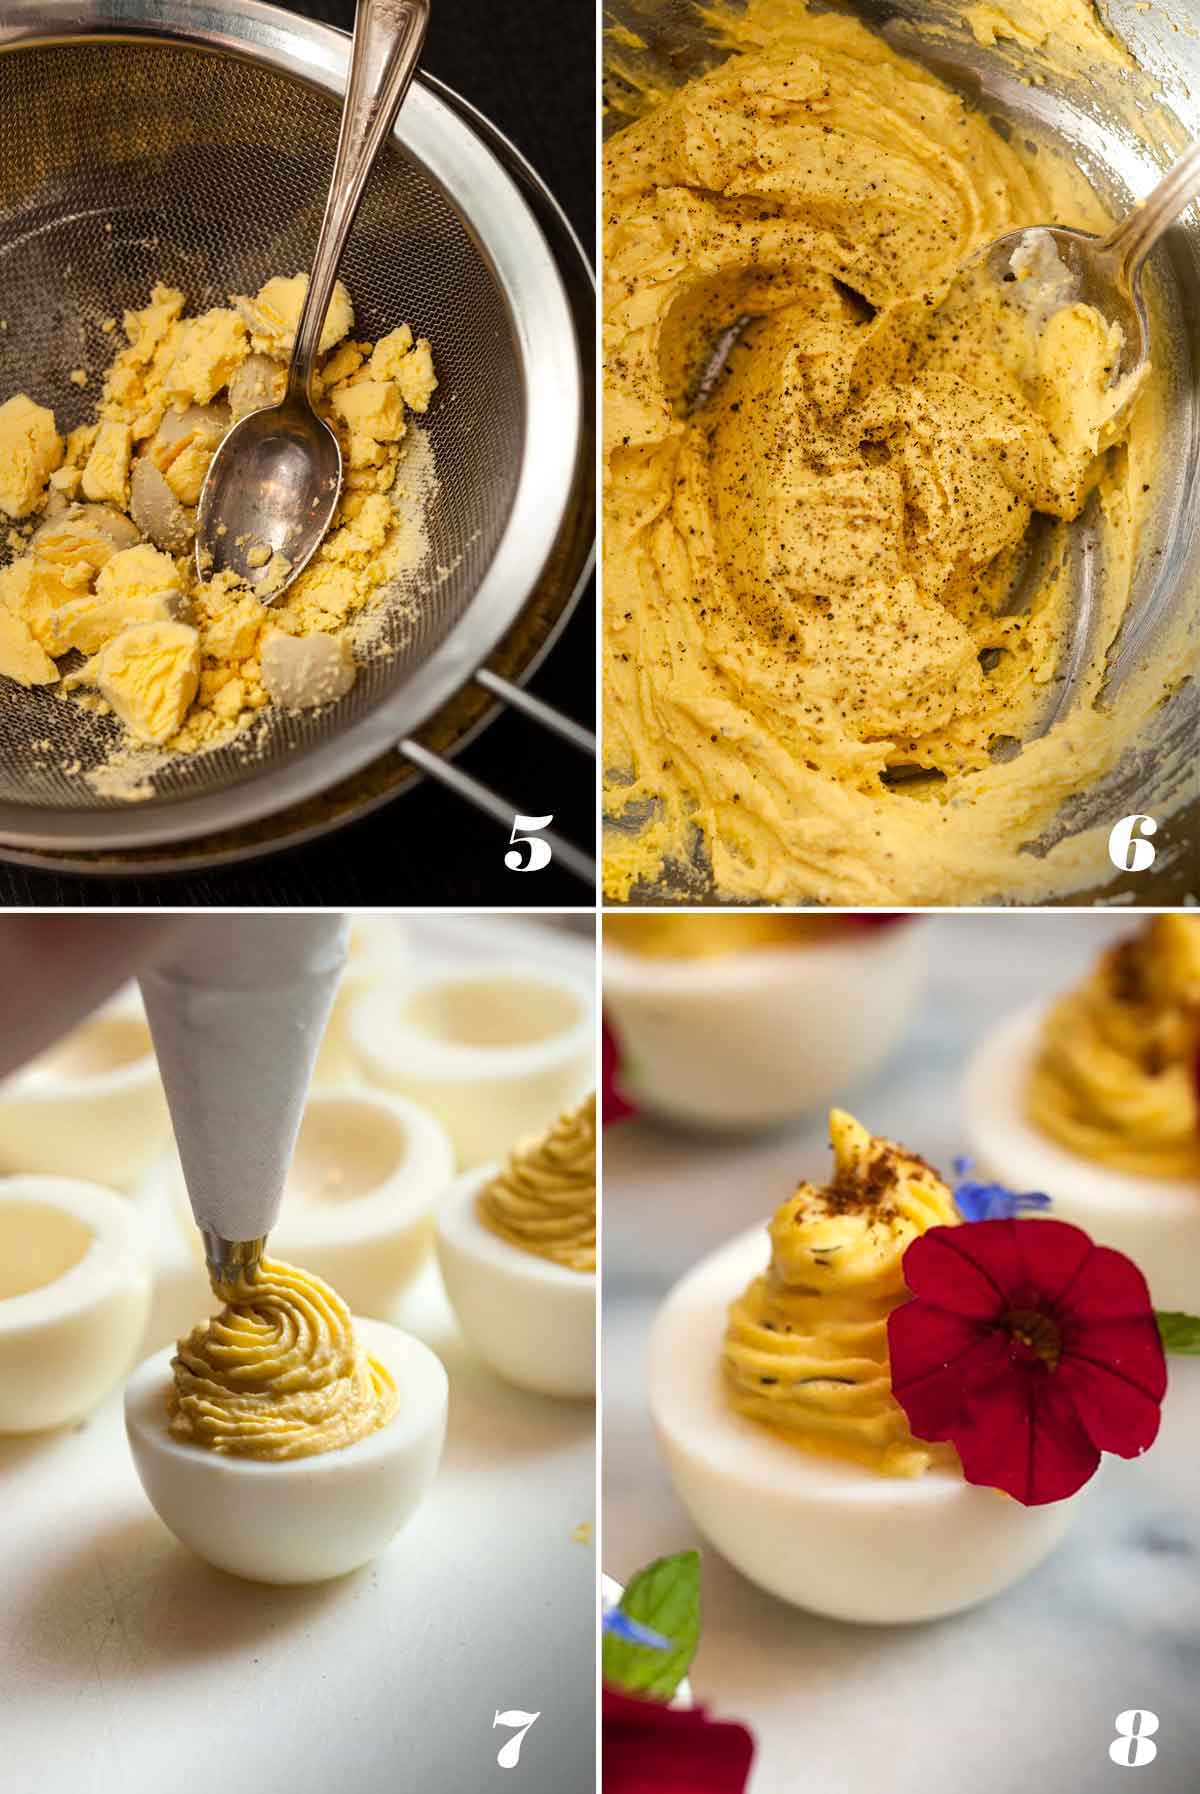 A collage of 4 images showing how to fill and garnish deviled eggs.